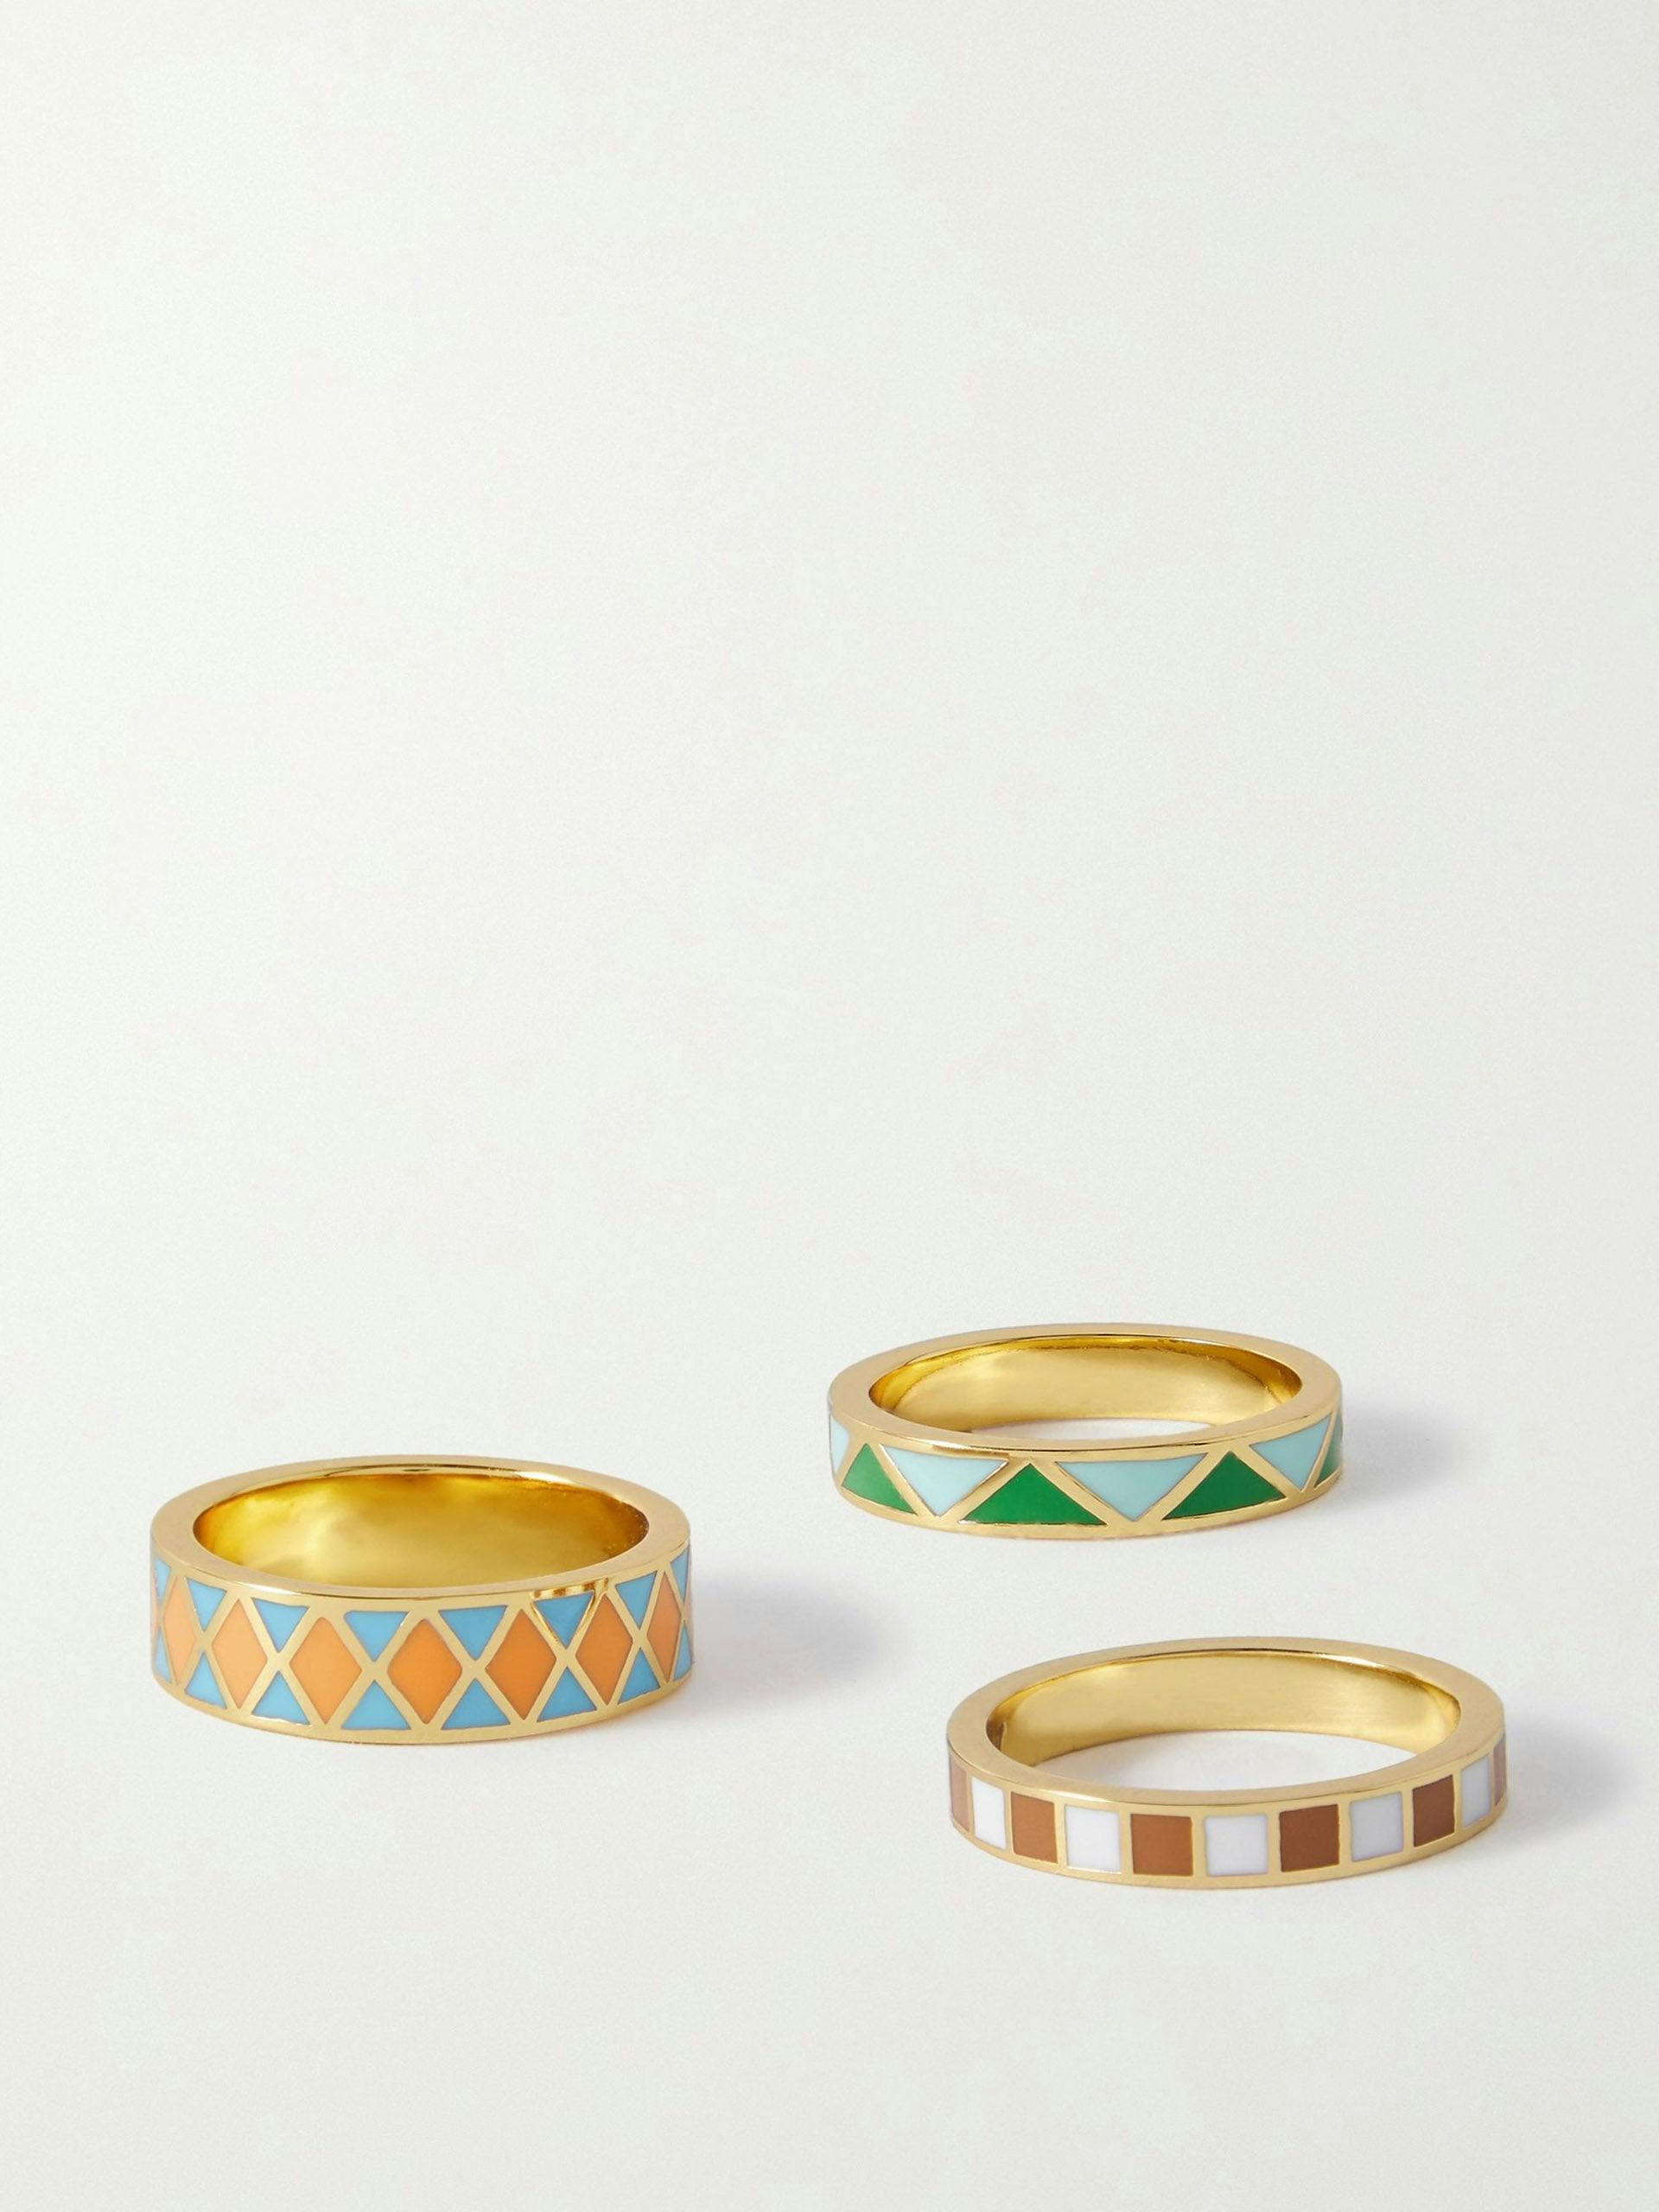 Circus gold-tone and enamel rings (set of 3)